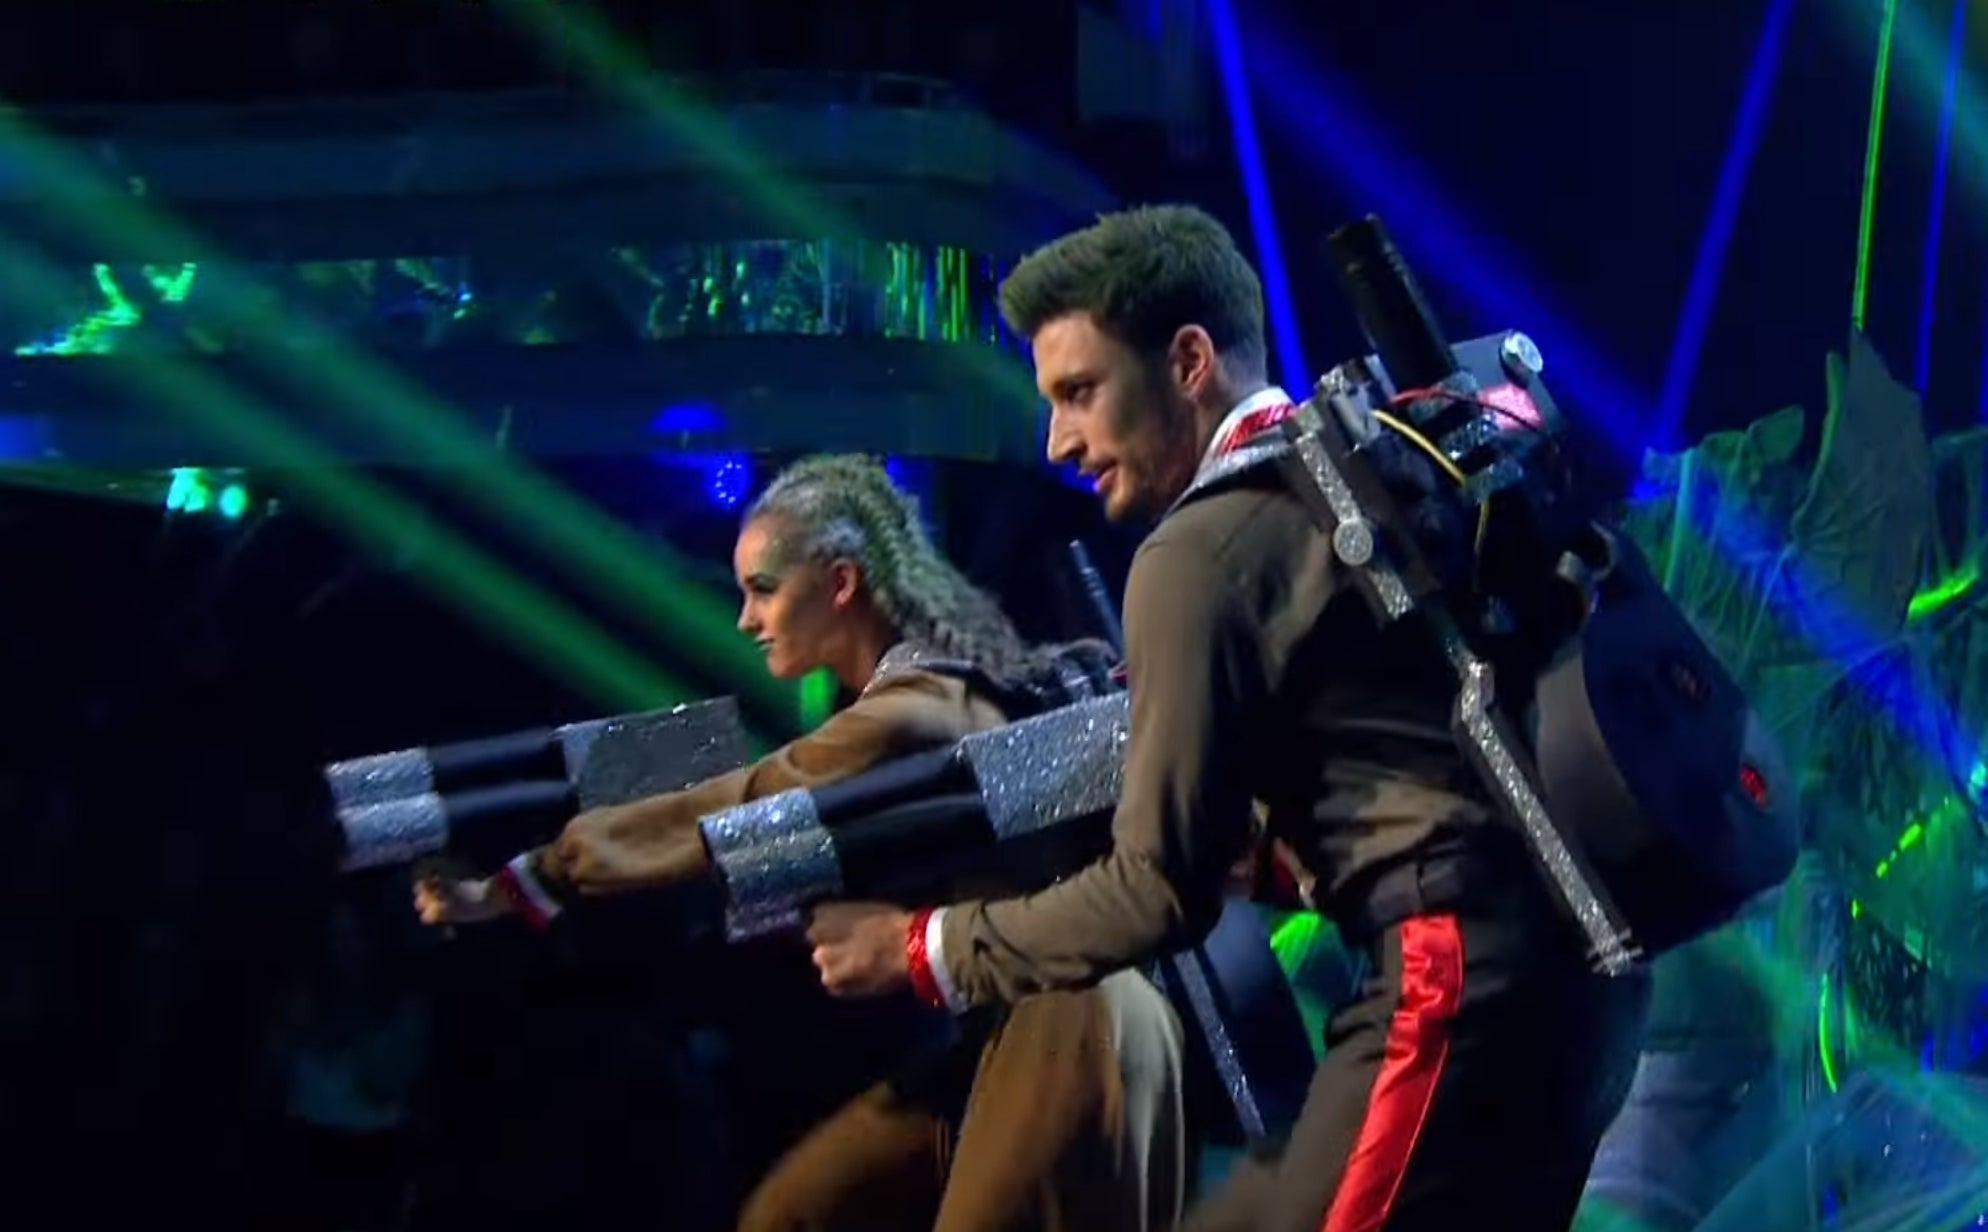 Georgia May Foote and Giovanni Pernice performing their Ghostbusters routine